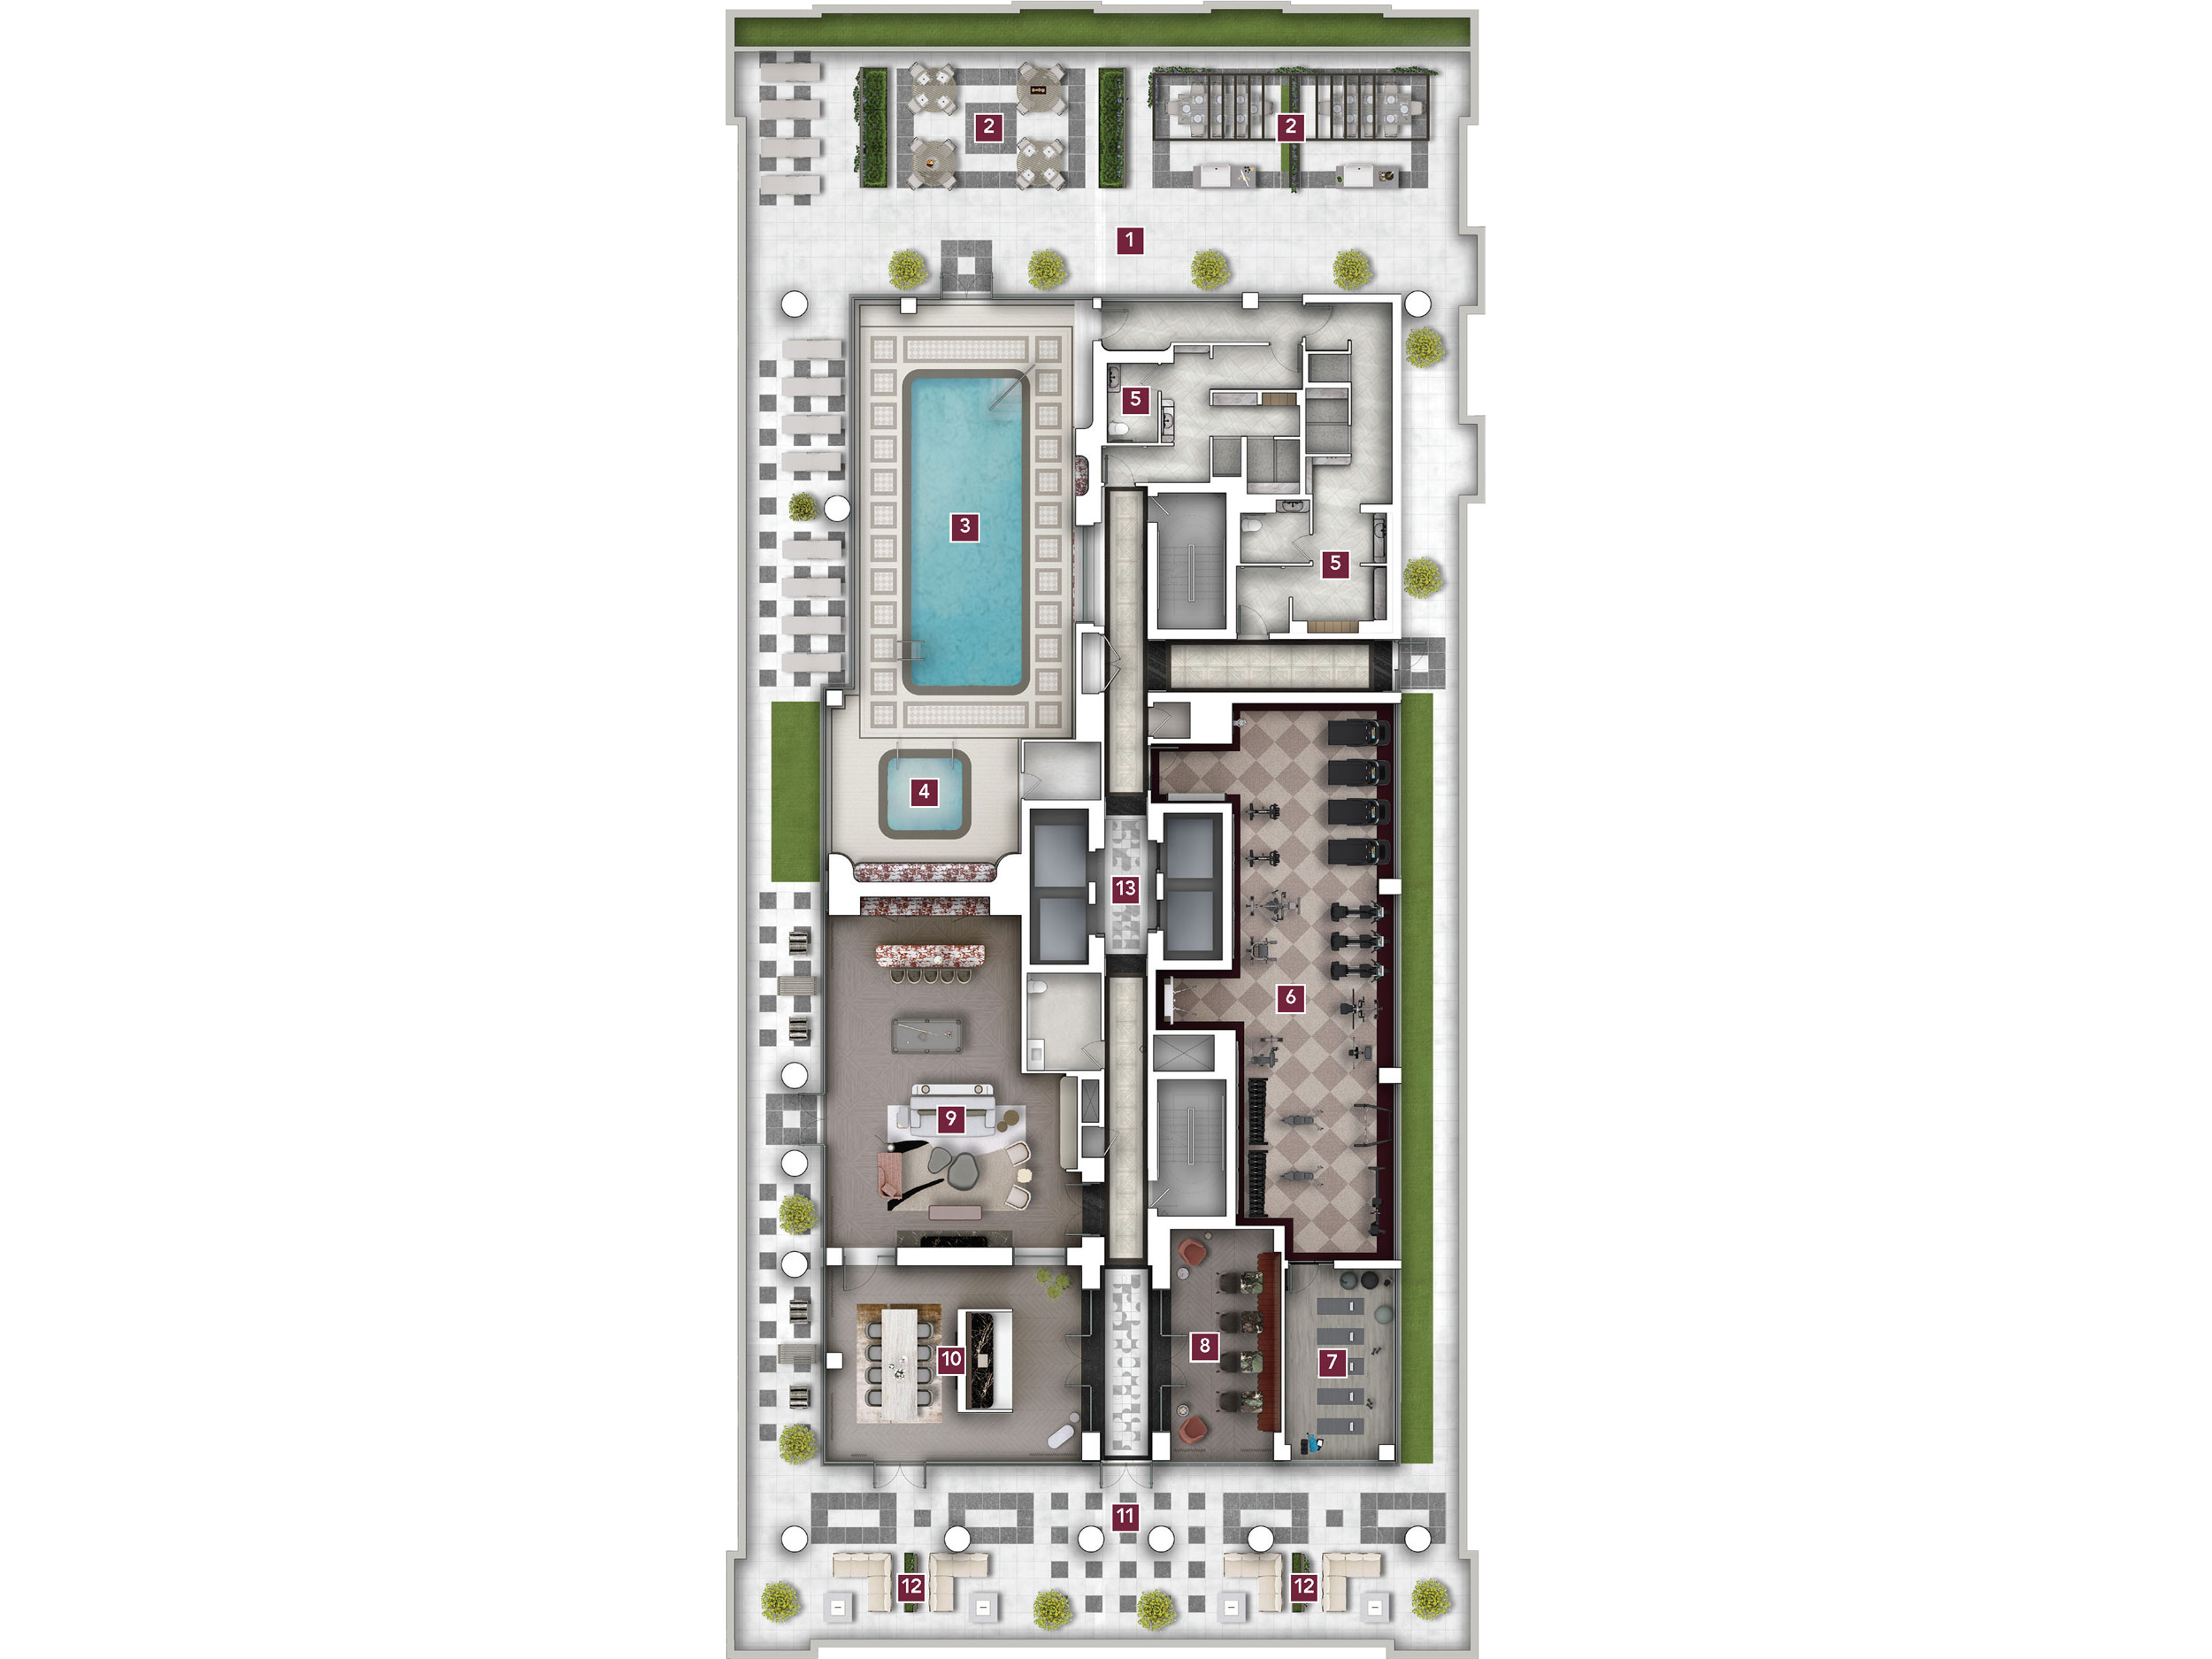 Chateau Auberge On The Park 5th Floor Amenity Plan